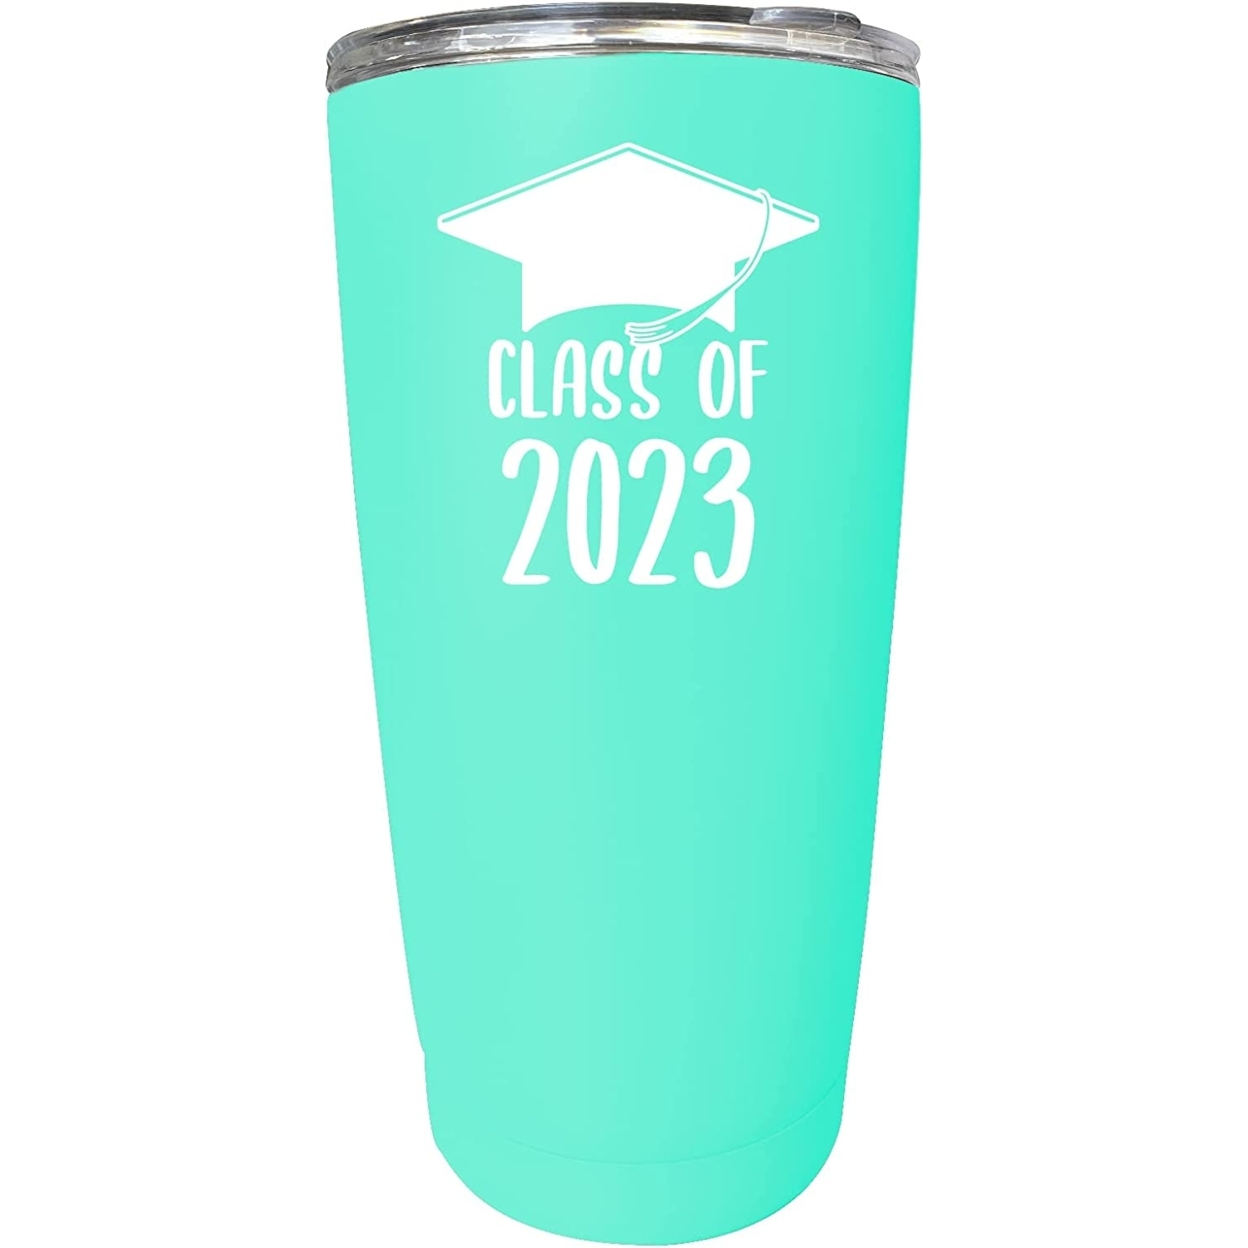 R And R Imports Class Of 2023 Graduation Senior Grad 16 Oz Stainless Steel Insulated Tumbler - Seafoam